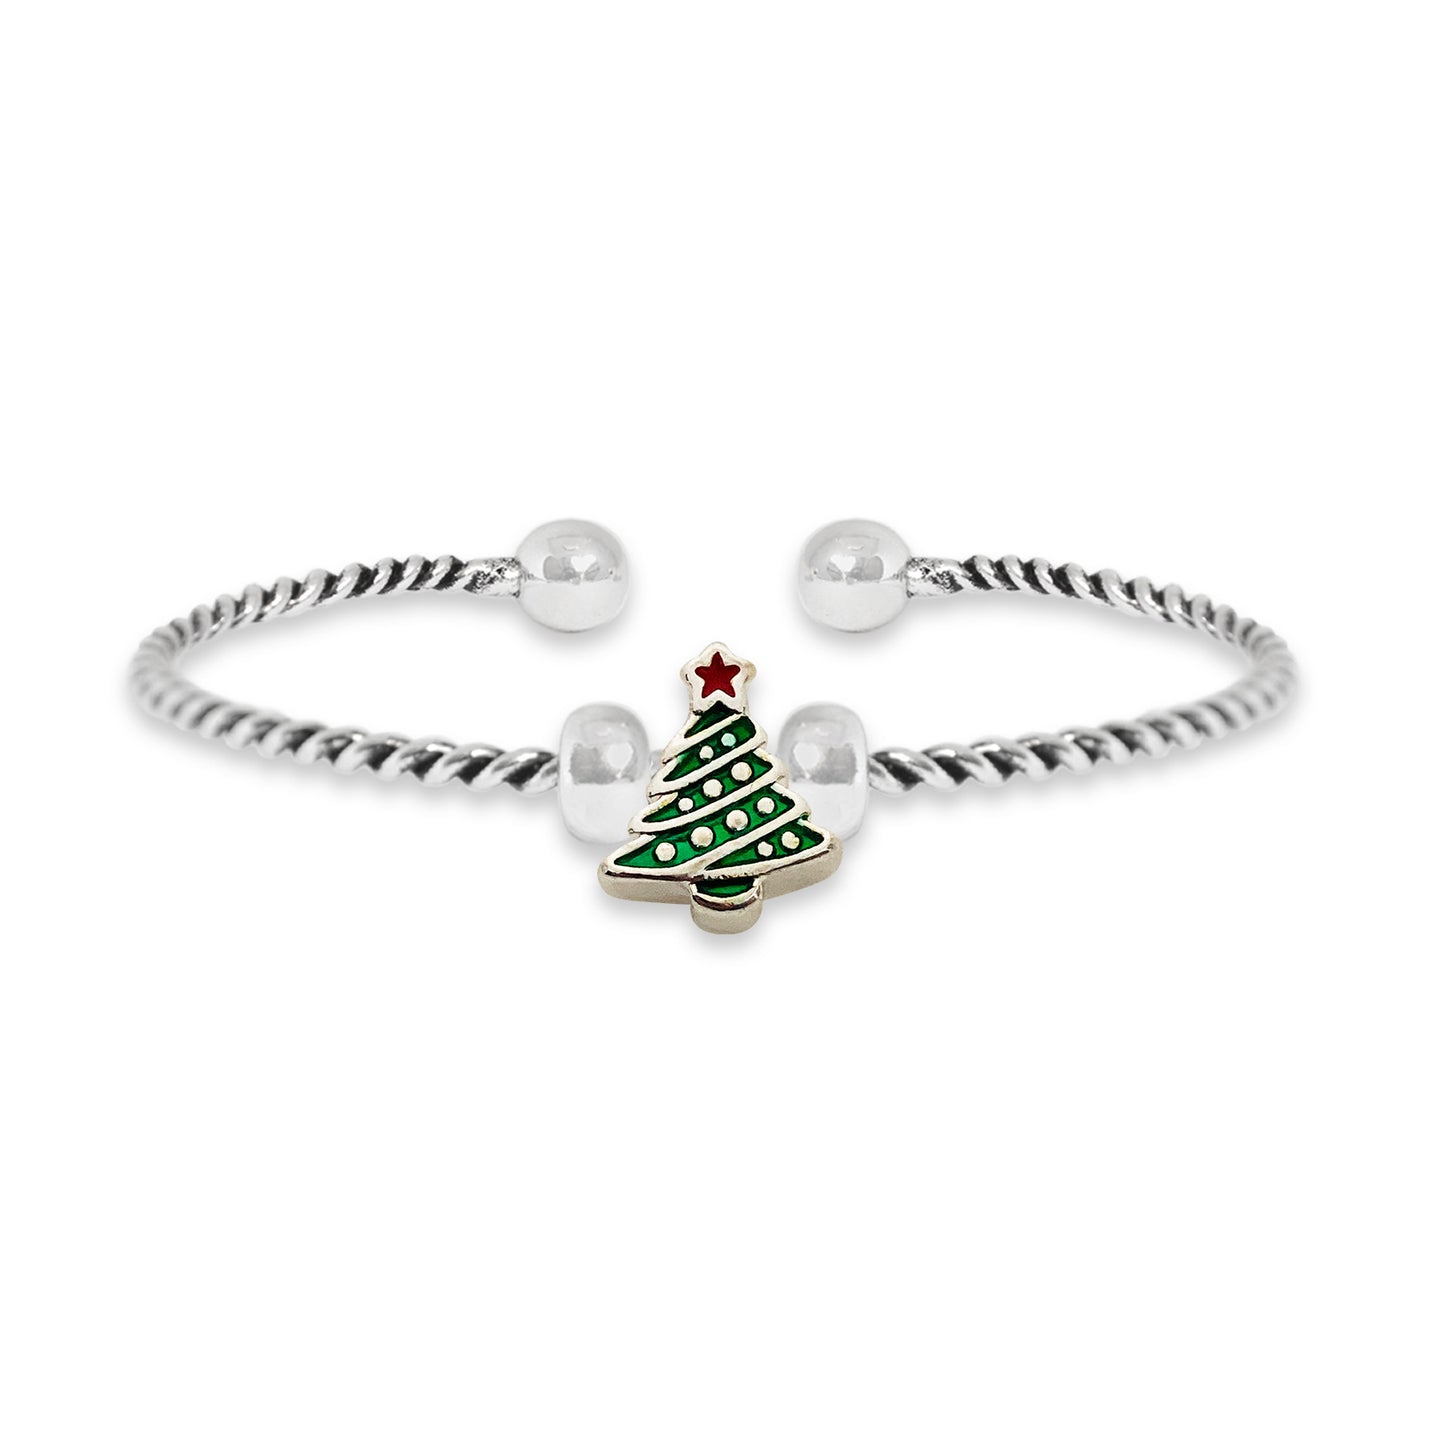 Christmas Cuff Bracelet Collection In Assorted Styles